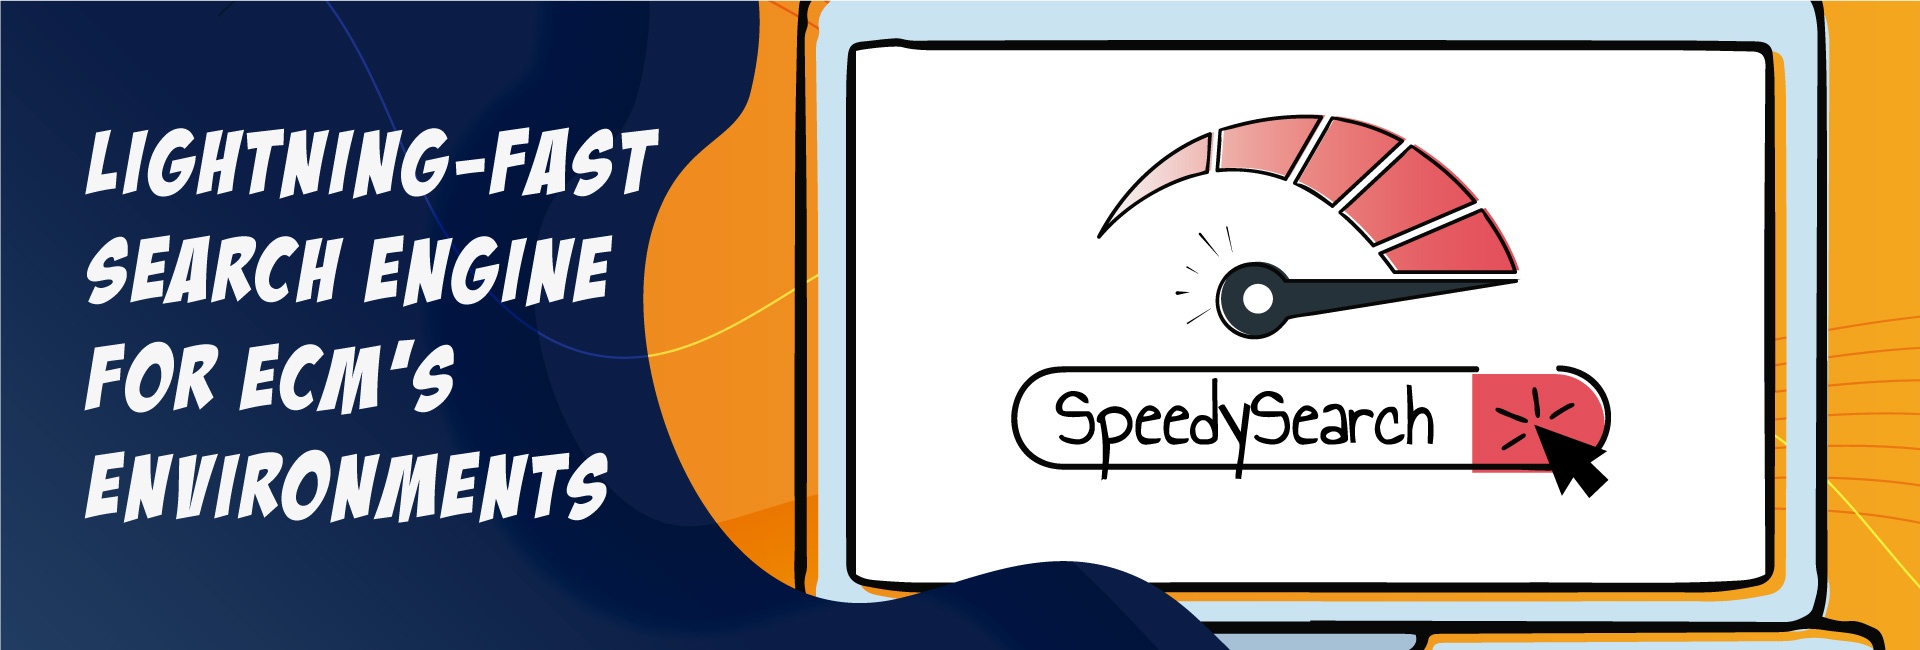 SpeedySearch - A lightning-fast search engine for ECM's - Texter Blue